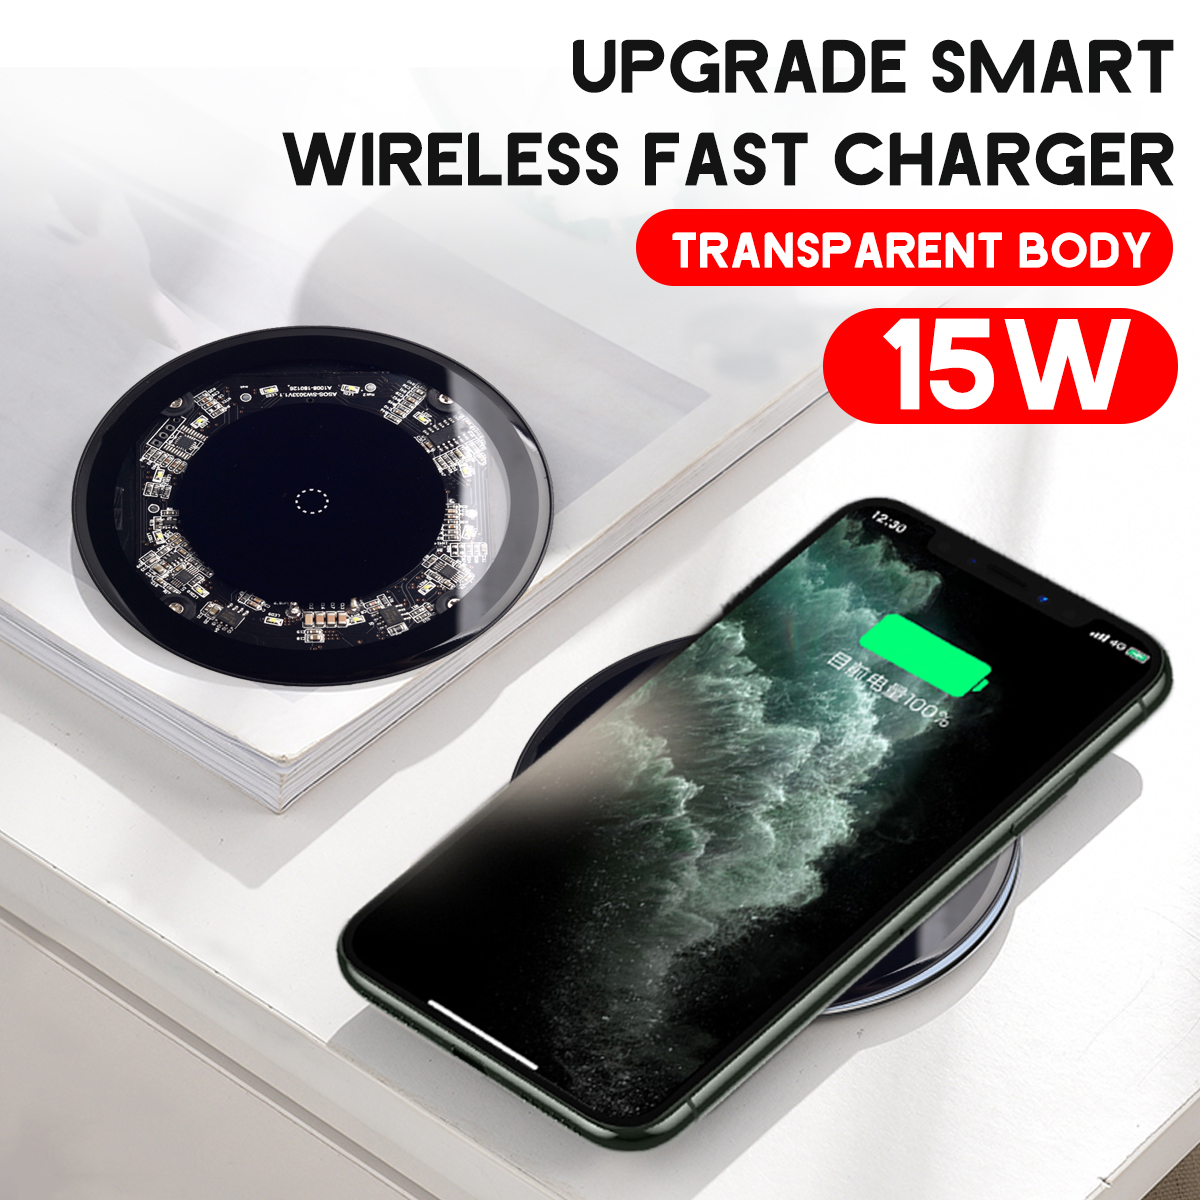 Bakeey-15W-Transparent-Smart-Induction-Quick-Charge-Wireless-Charger-for-iPhone-11-Pro-Max-for-Samsu-1646160-2